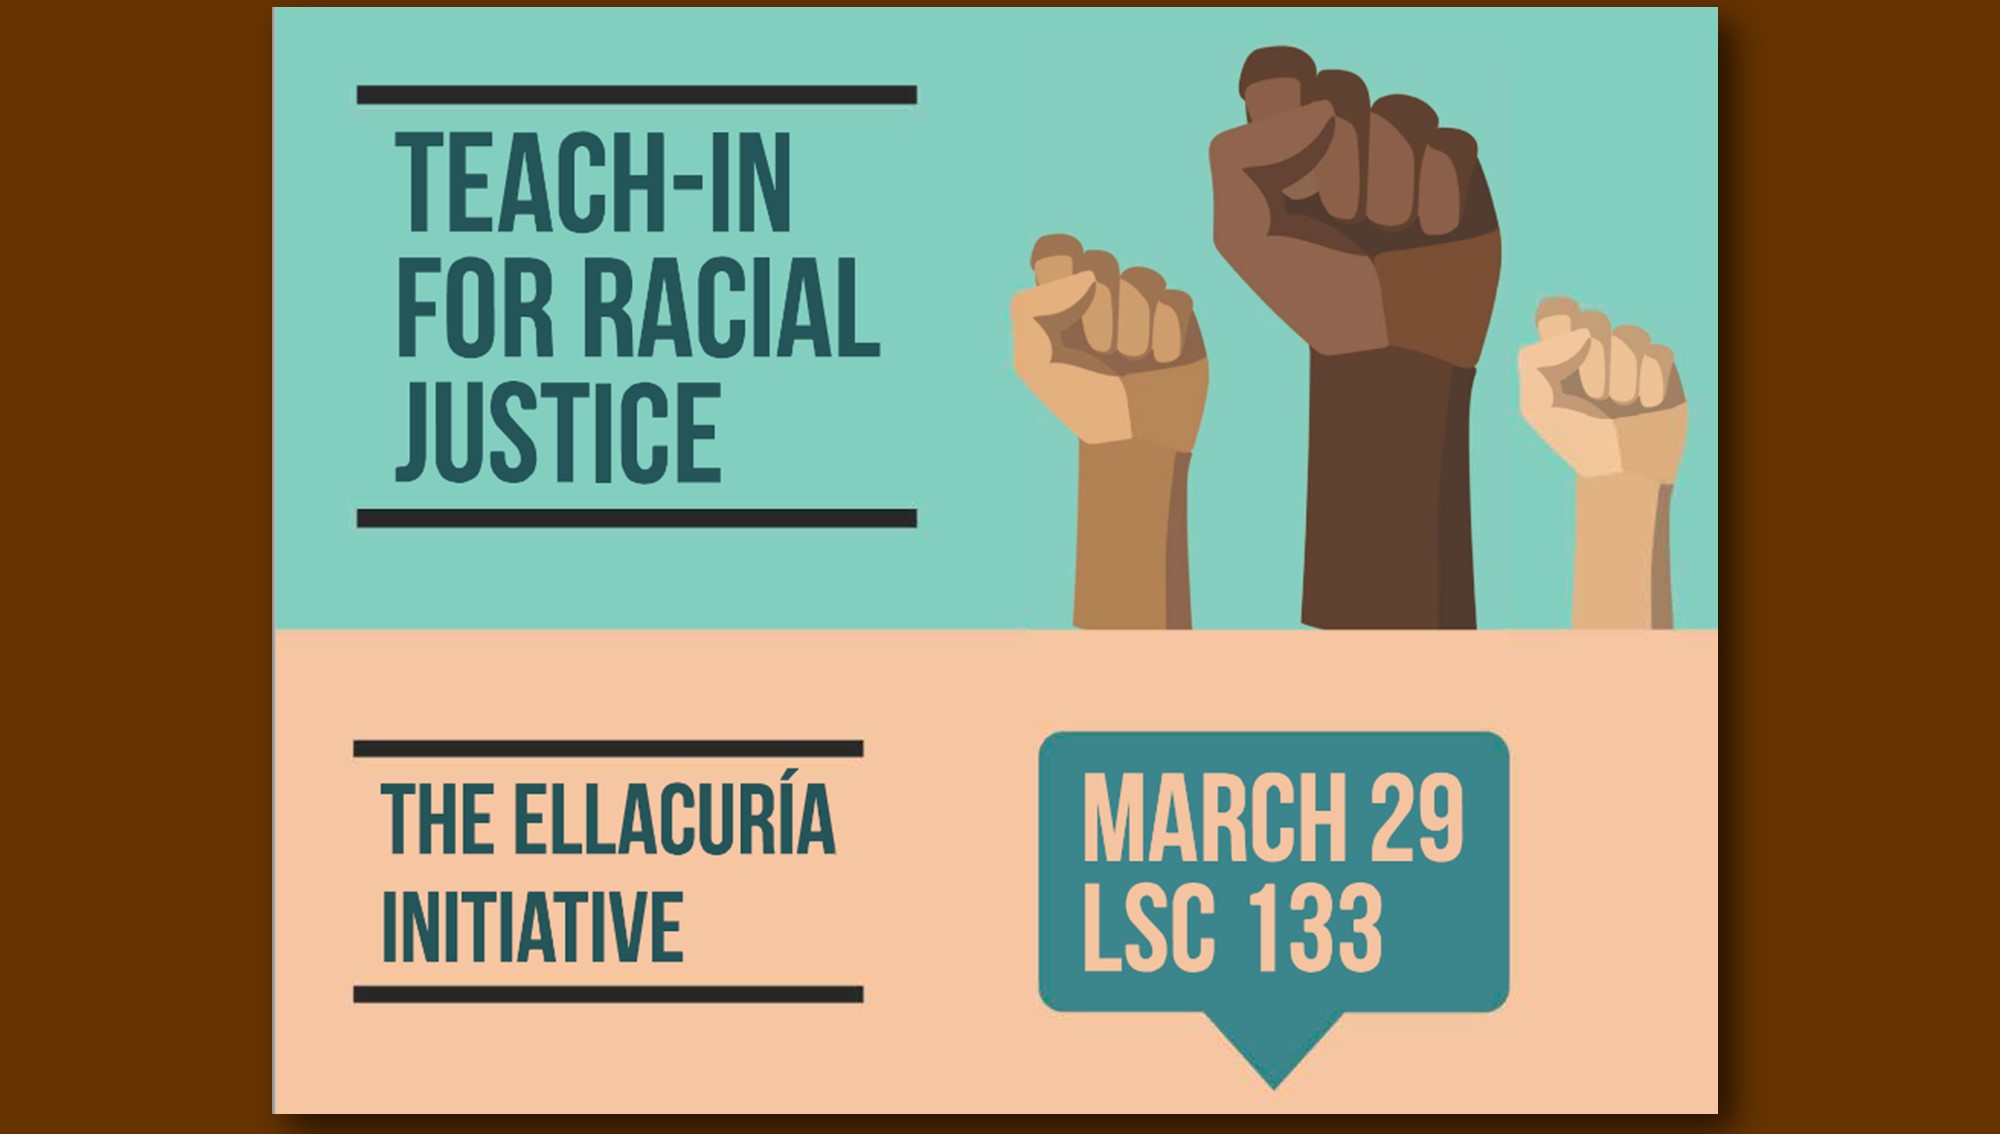 Teach-In For Racial Justice March 29 image